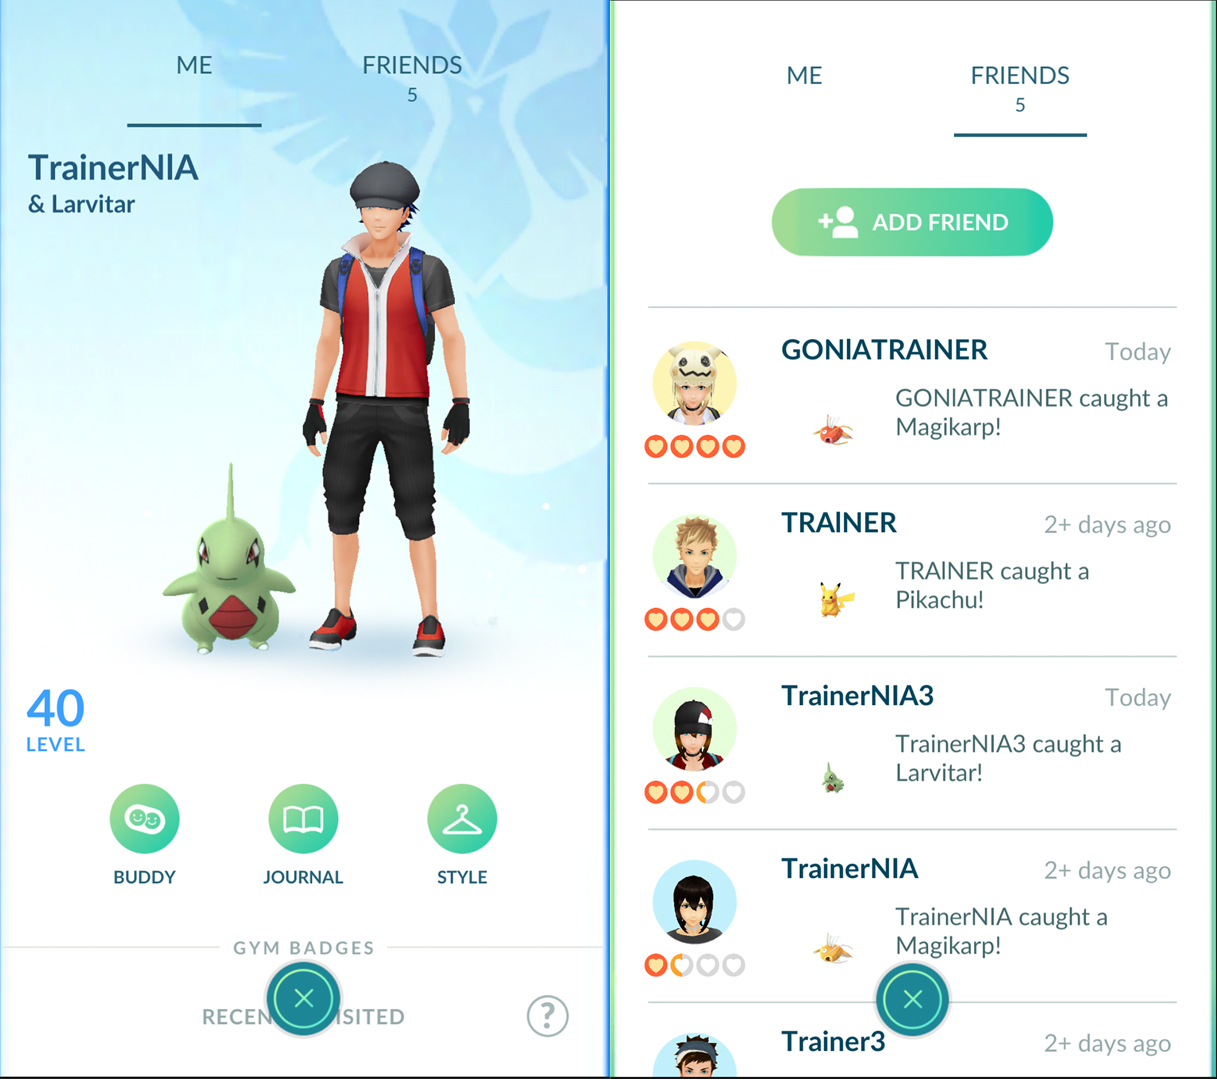 How Pokemon Go Update's New Trading And Friends Systems Work